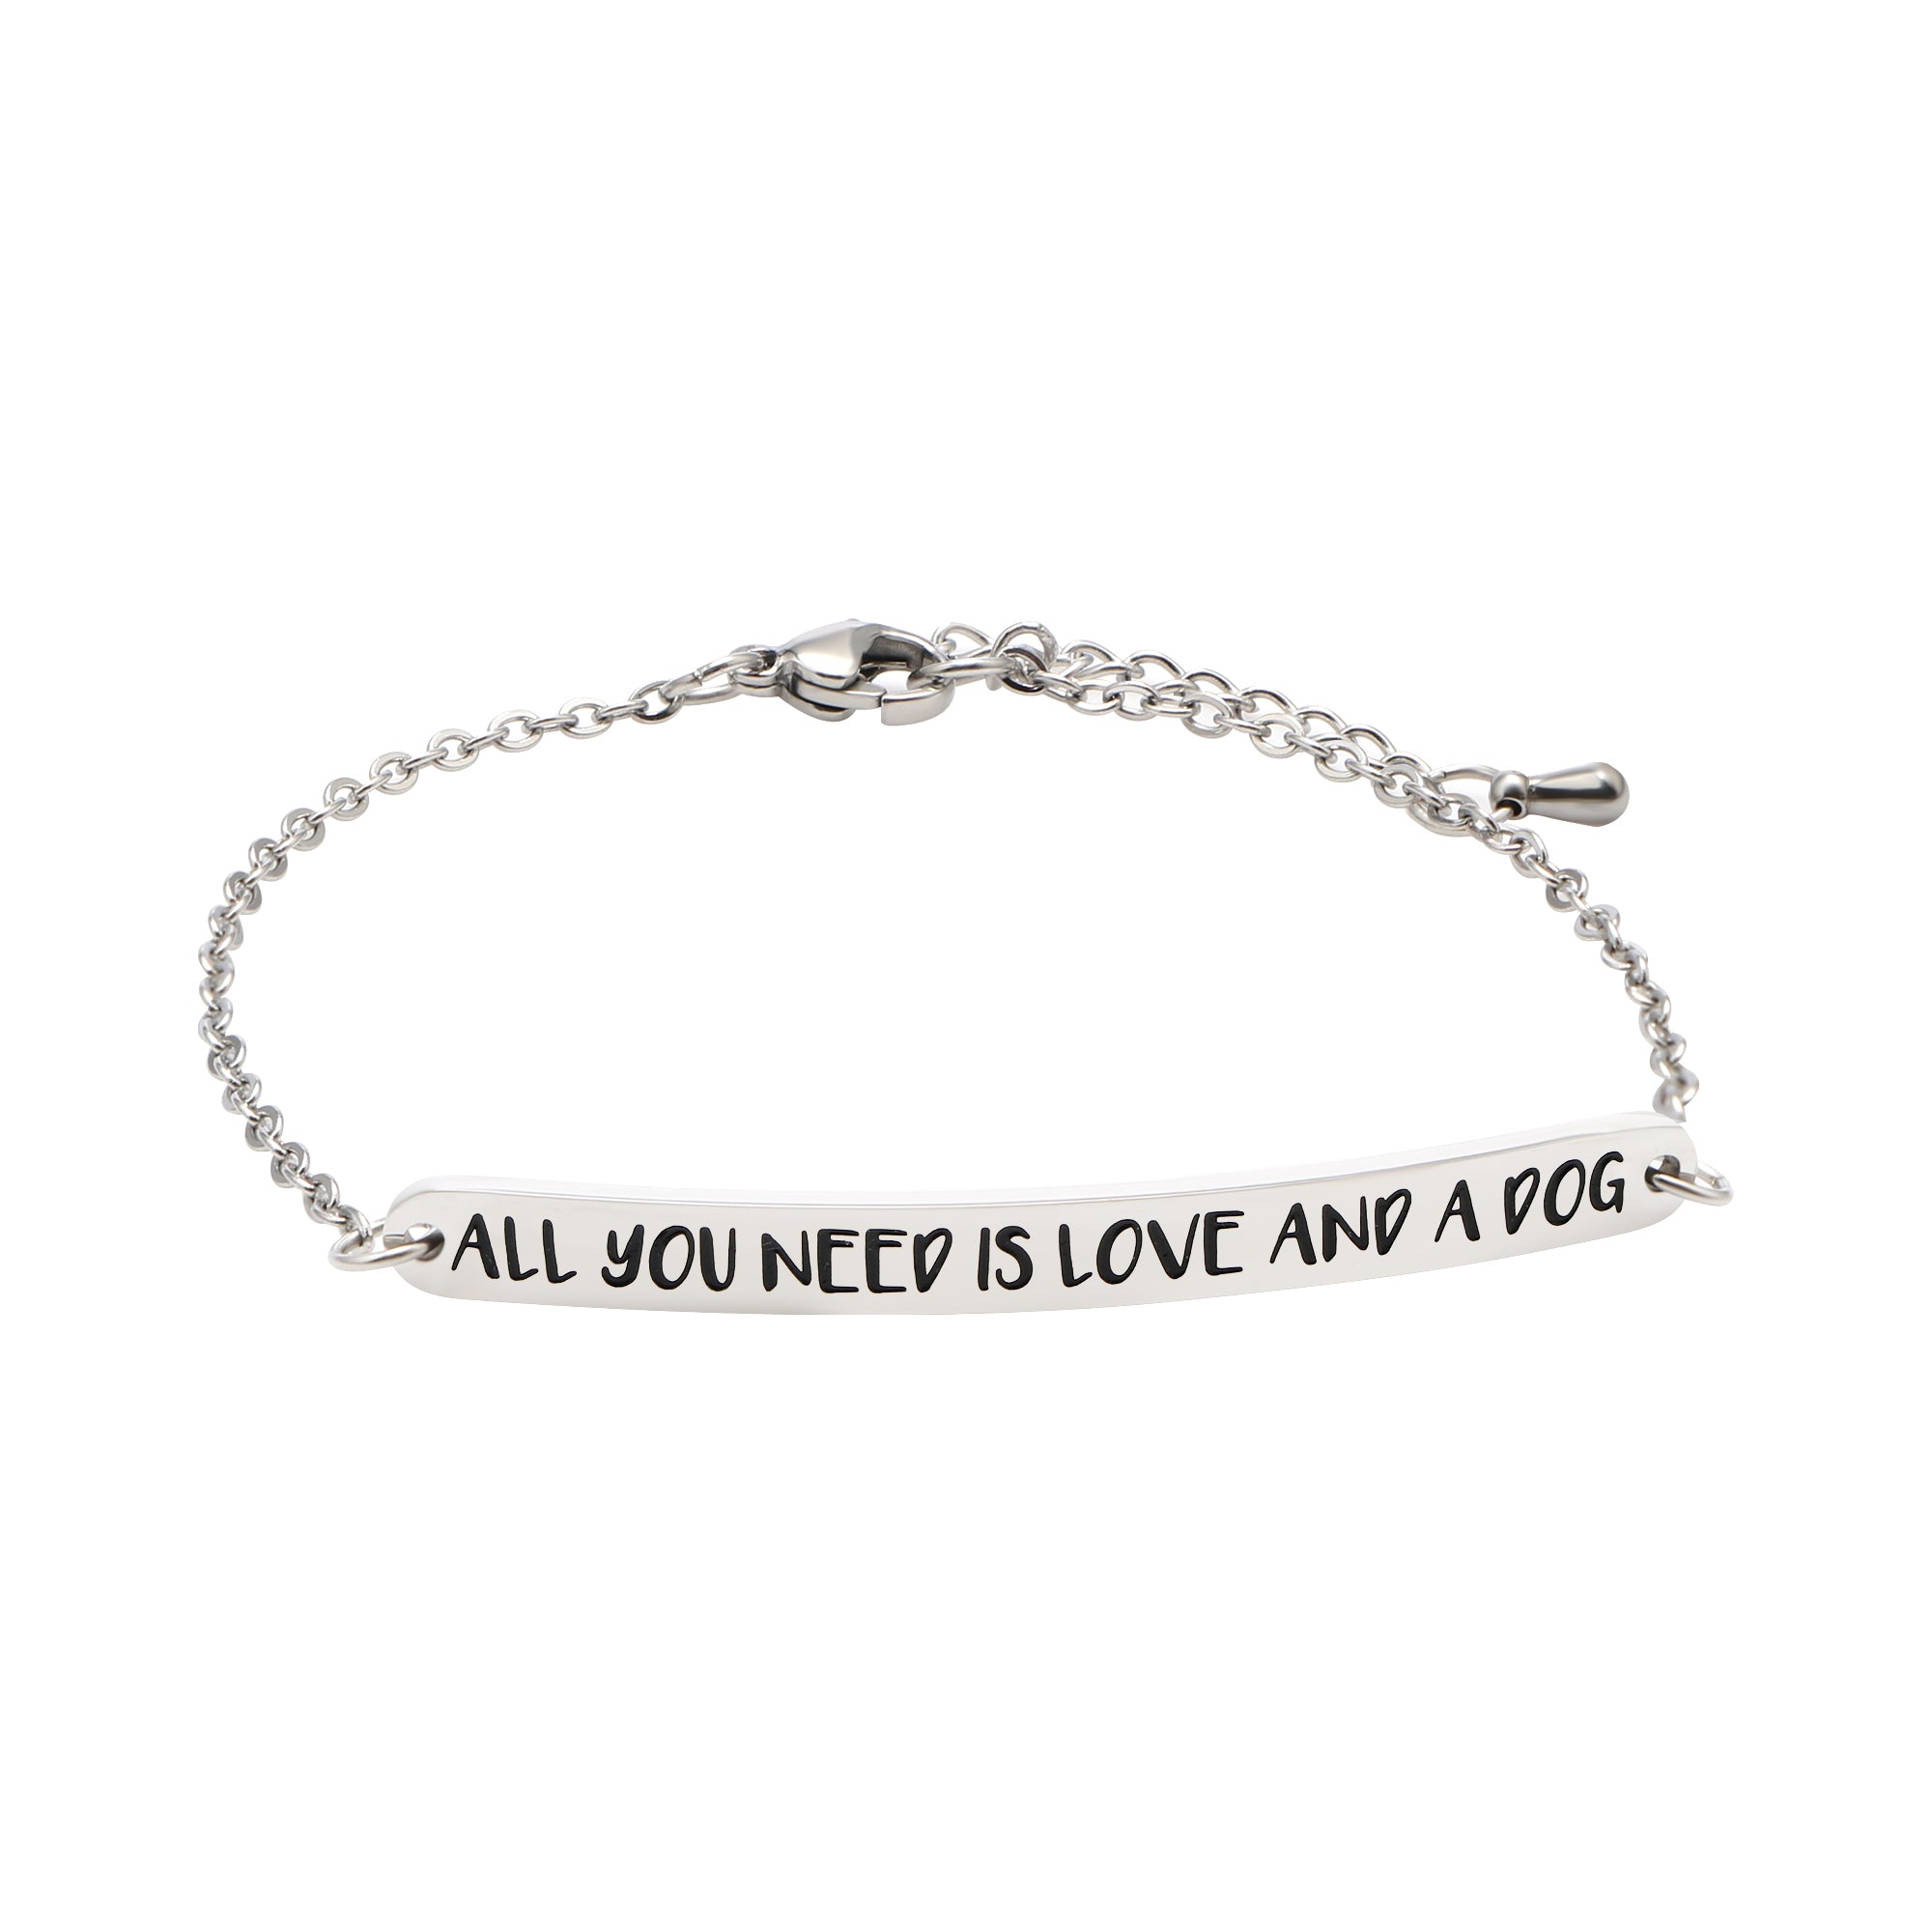 All You Need is Love and a Dog Bracelet